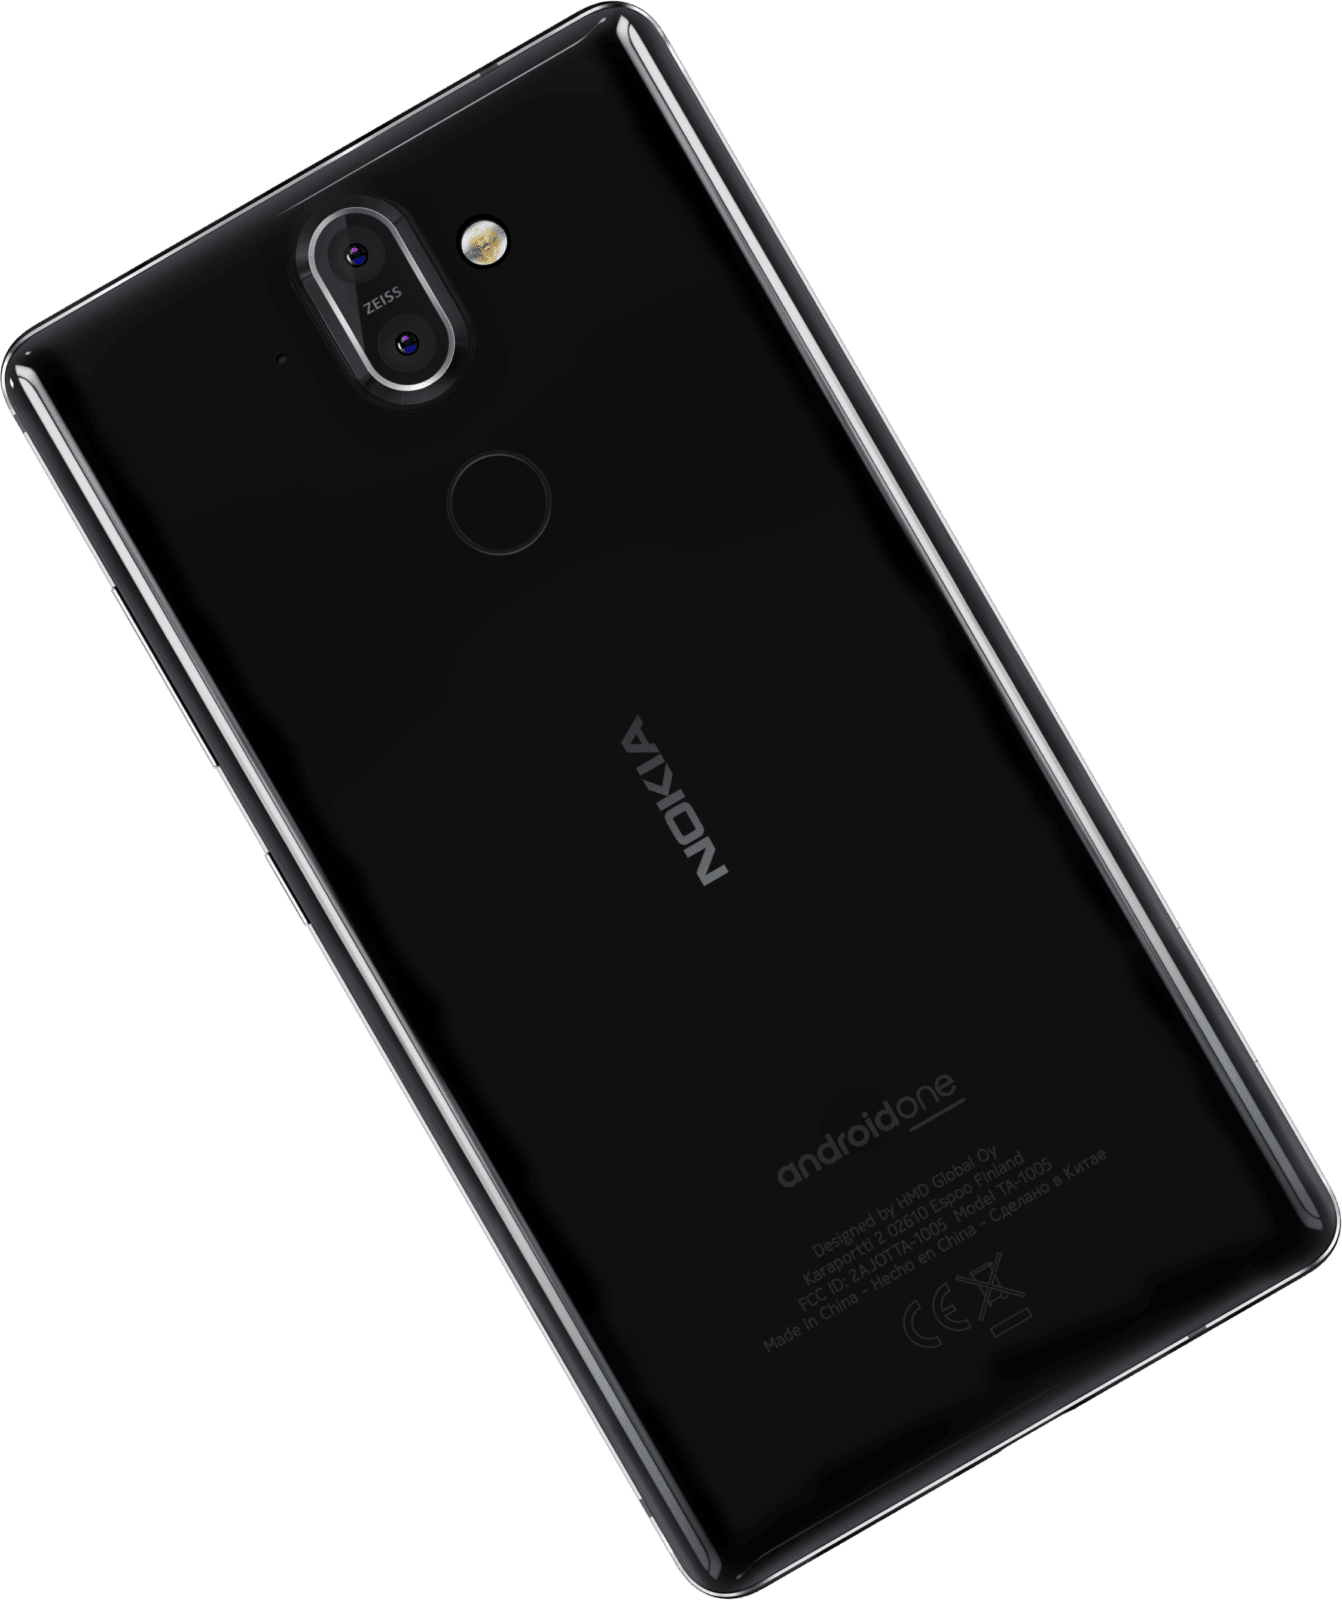 Nokia8Sirocco 08 android phone optimised The 3 Nokia Smartphones to Look Out in 2018